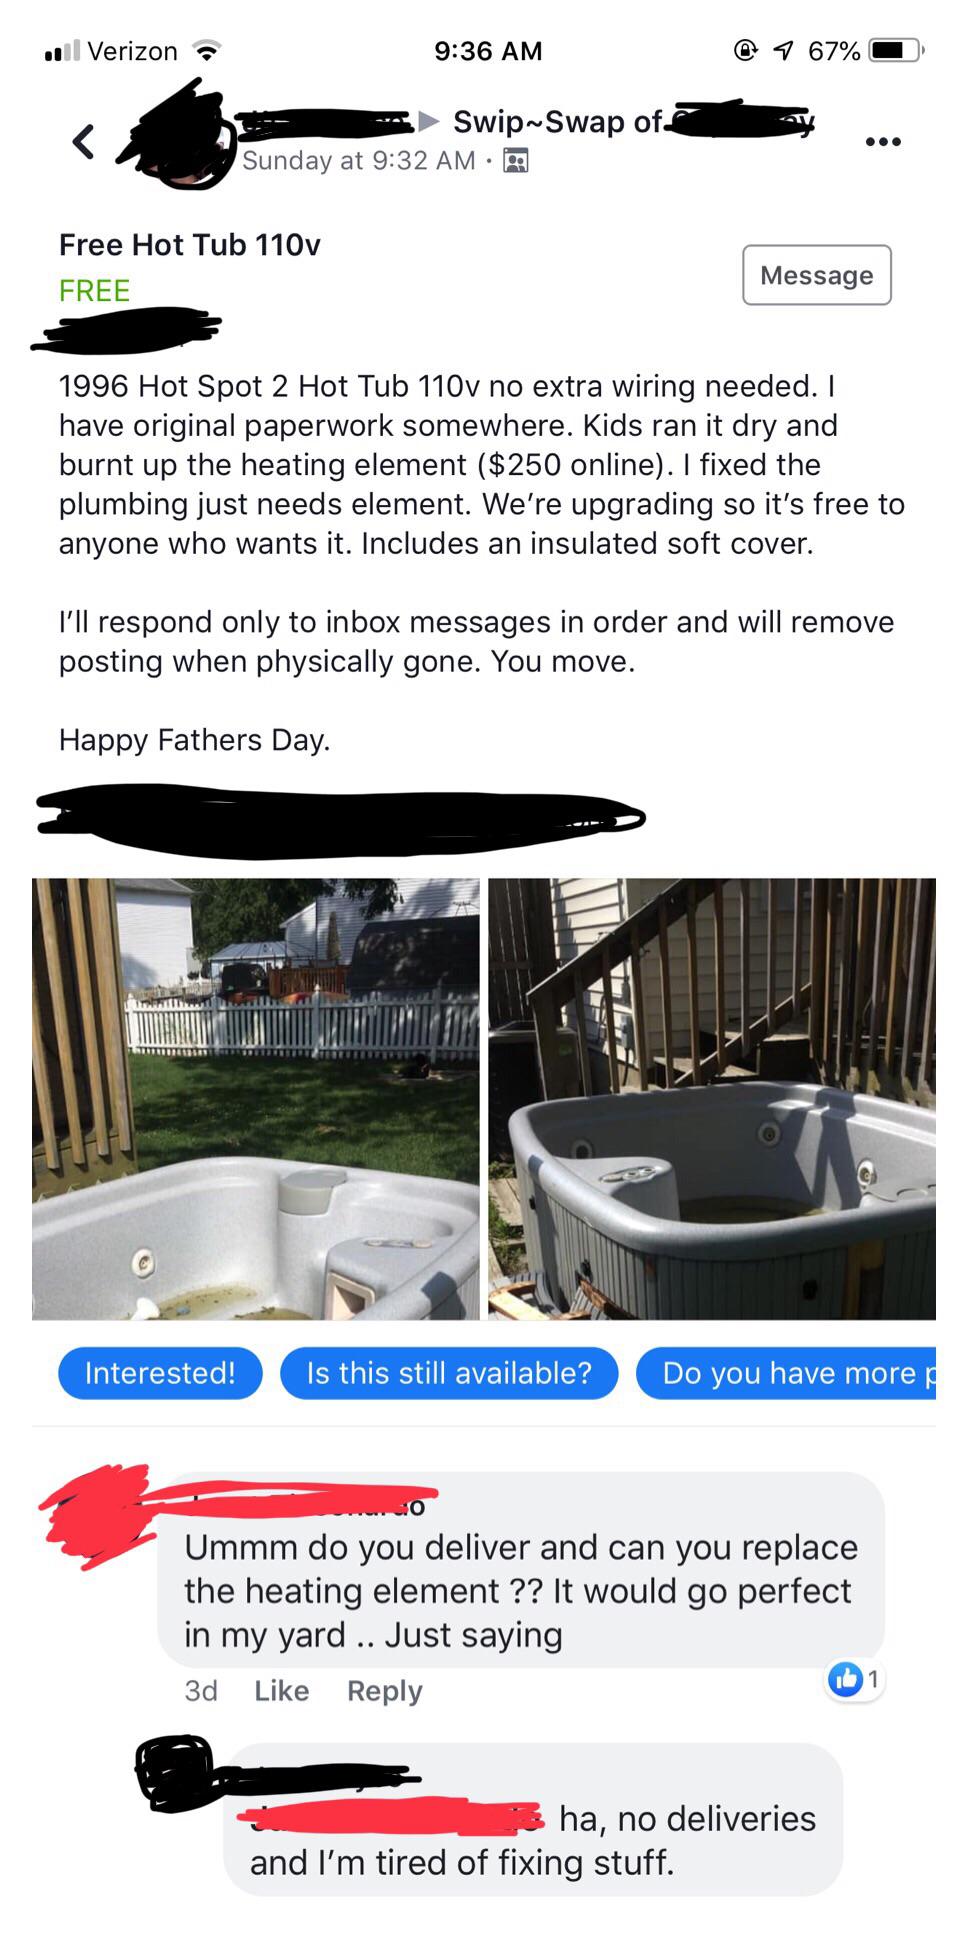 bumper - oll Verizon. @ 9 67% SwipSwap of S Sunday at ay Free Hot Tub 110v Free Message 1996 Hot Spot 2 Hot Tub 110v no extra wiring needed. I have original paperwork somewhere. Kids ran it dry and burnt up the heating element $250 online. I fixed the plu